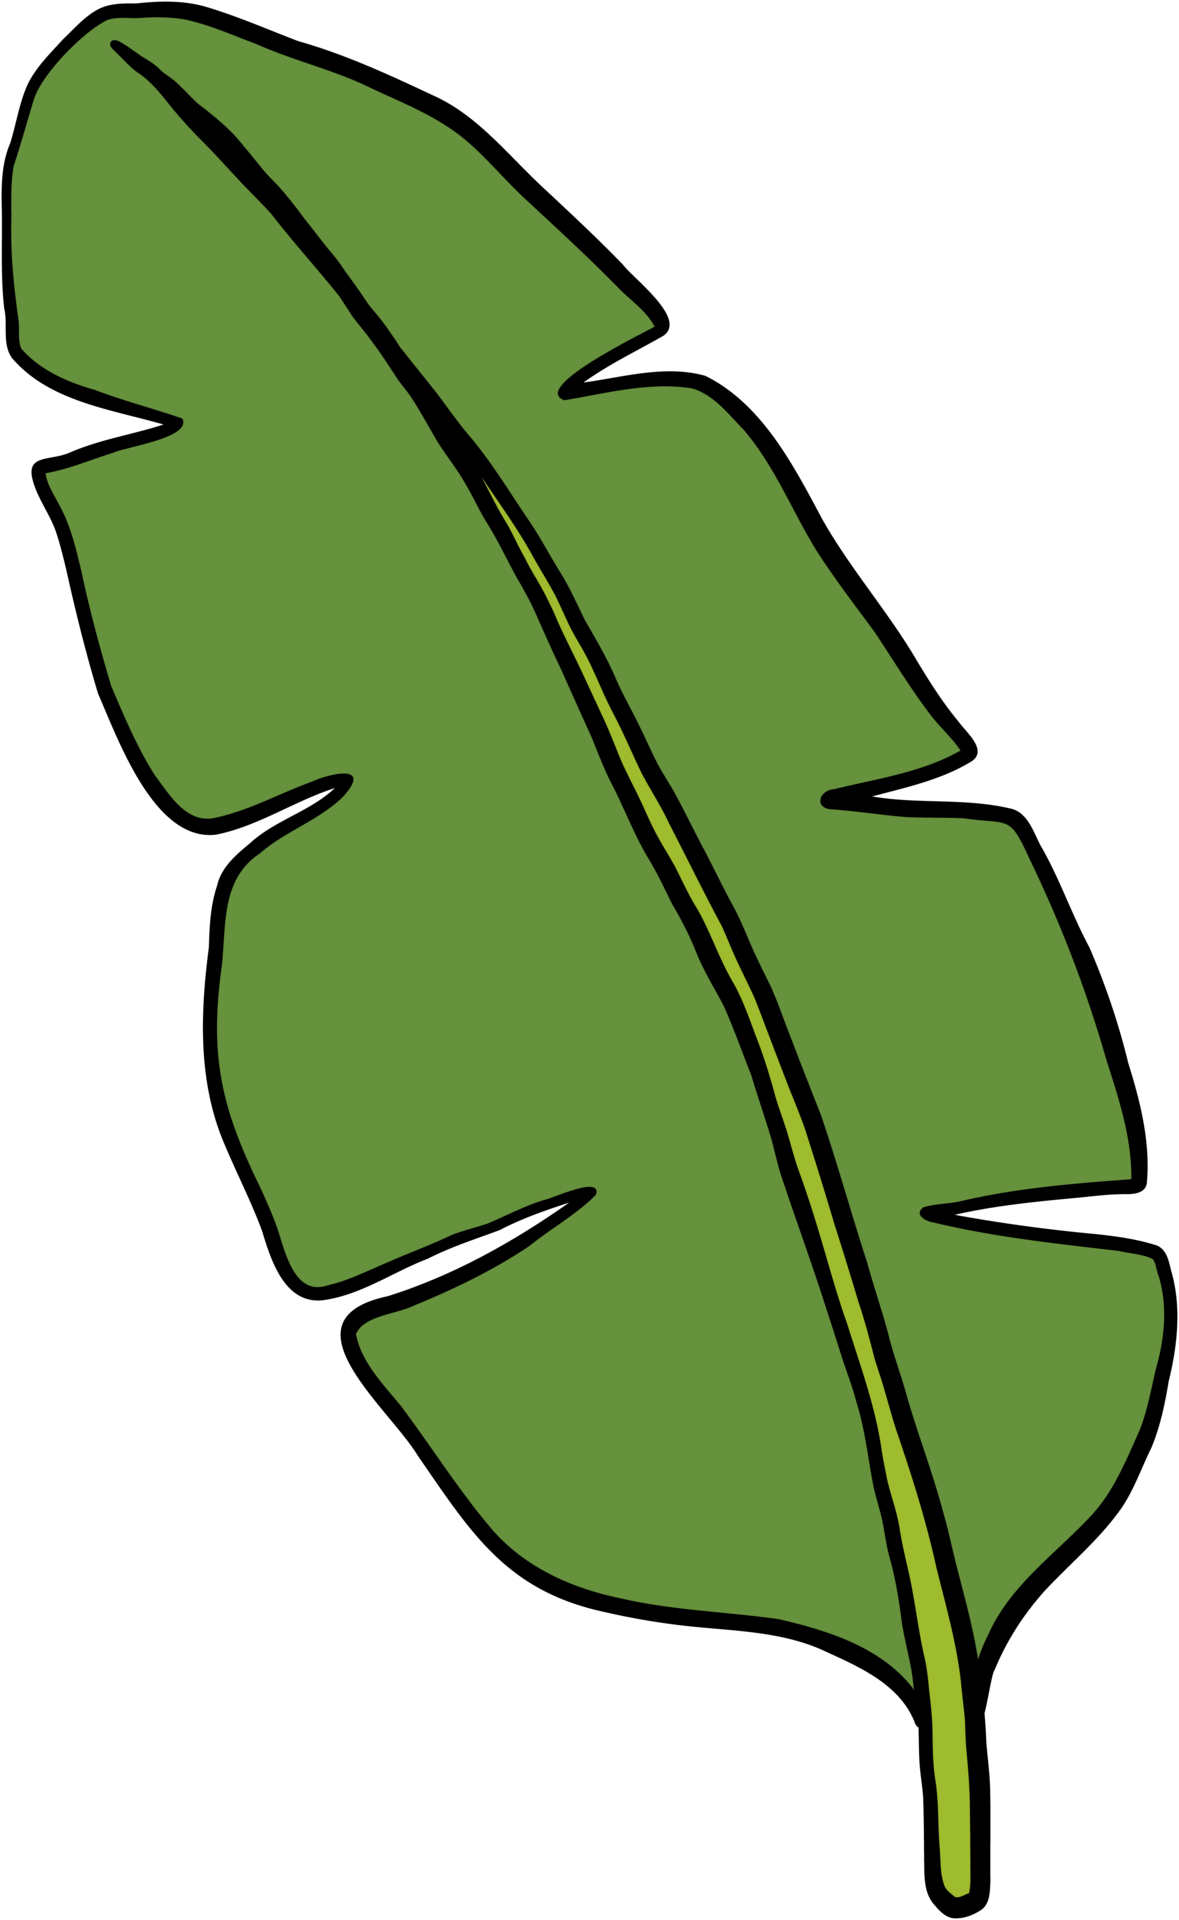 simplicity banana leaf freehand continuous drawing flat design